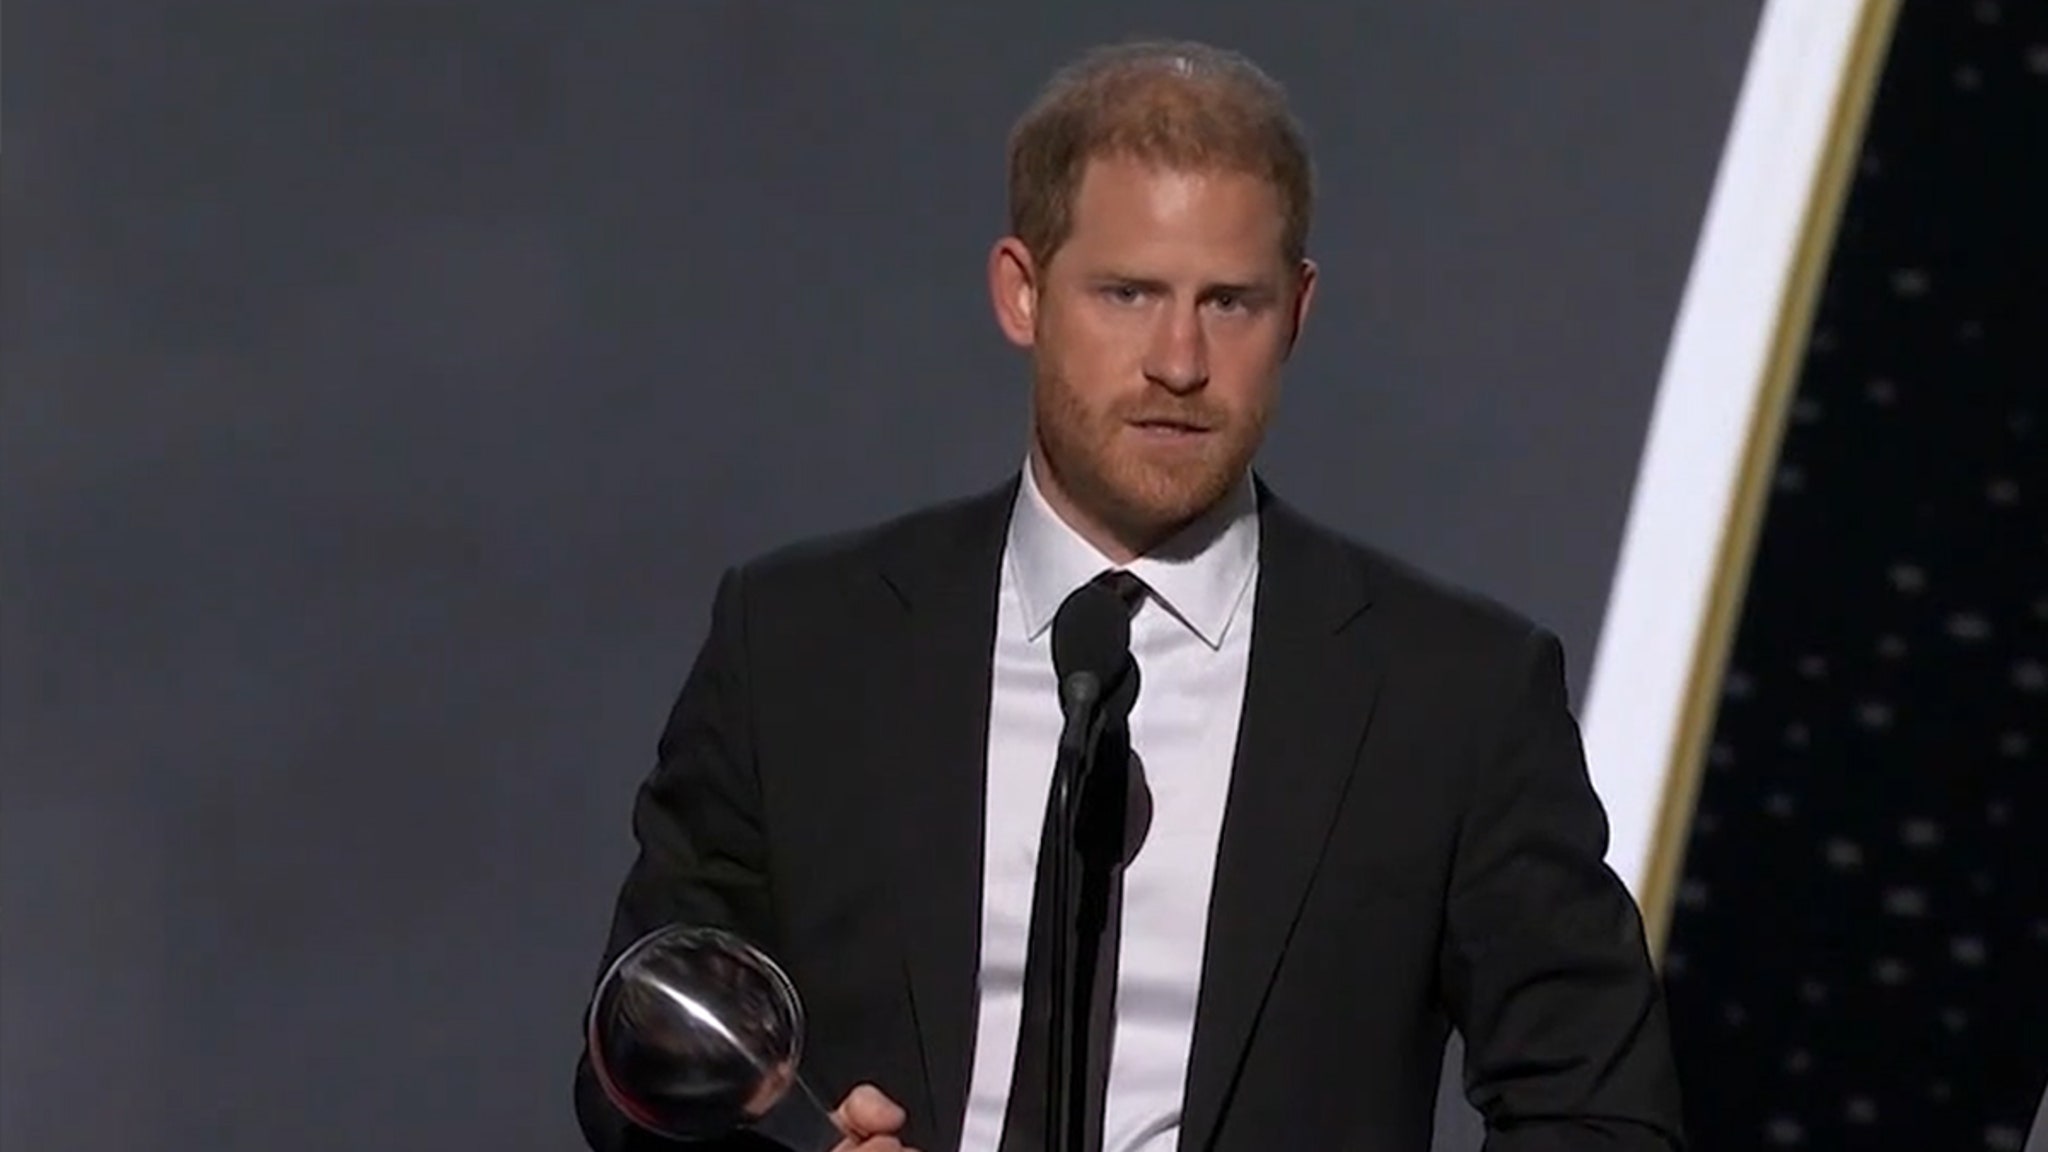 Prince Harry Pays Tribute to Pat Tillman's Mother During Powerful ESPYs Speech